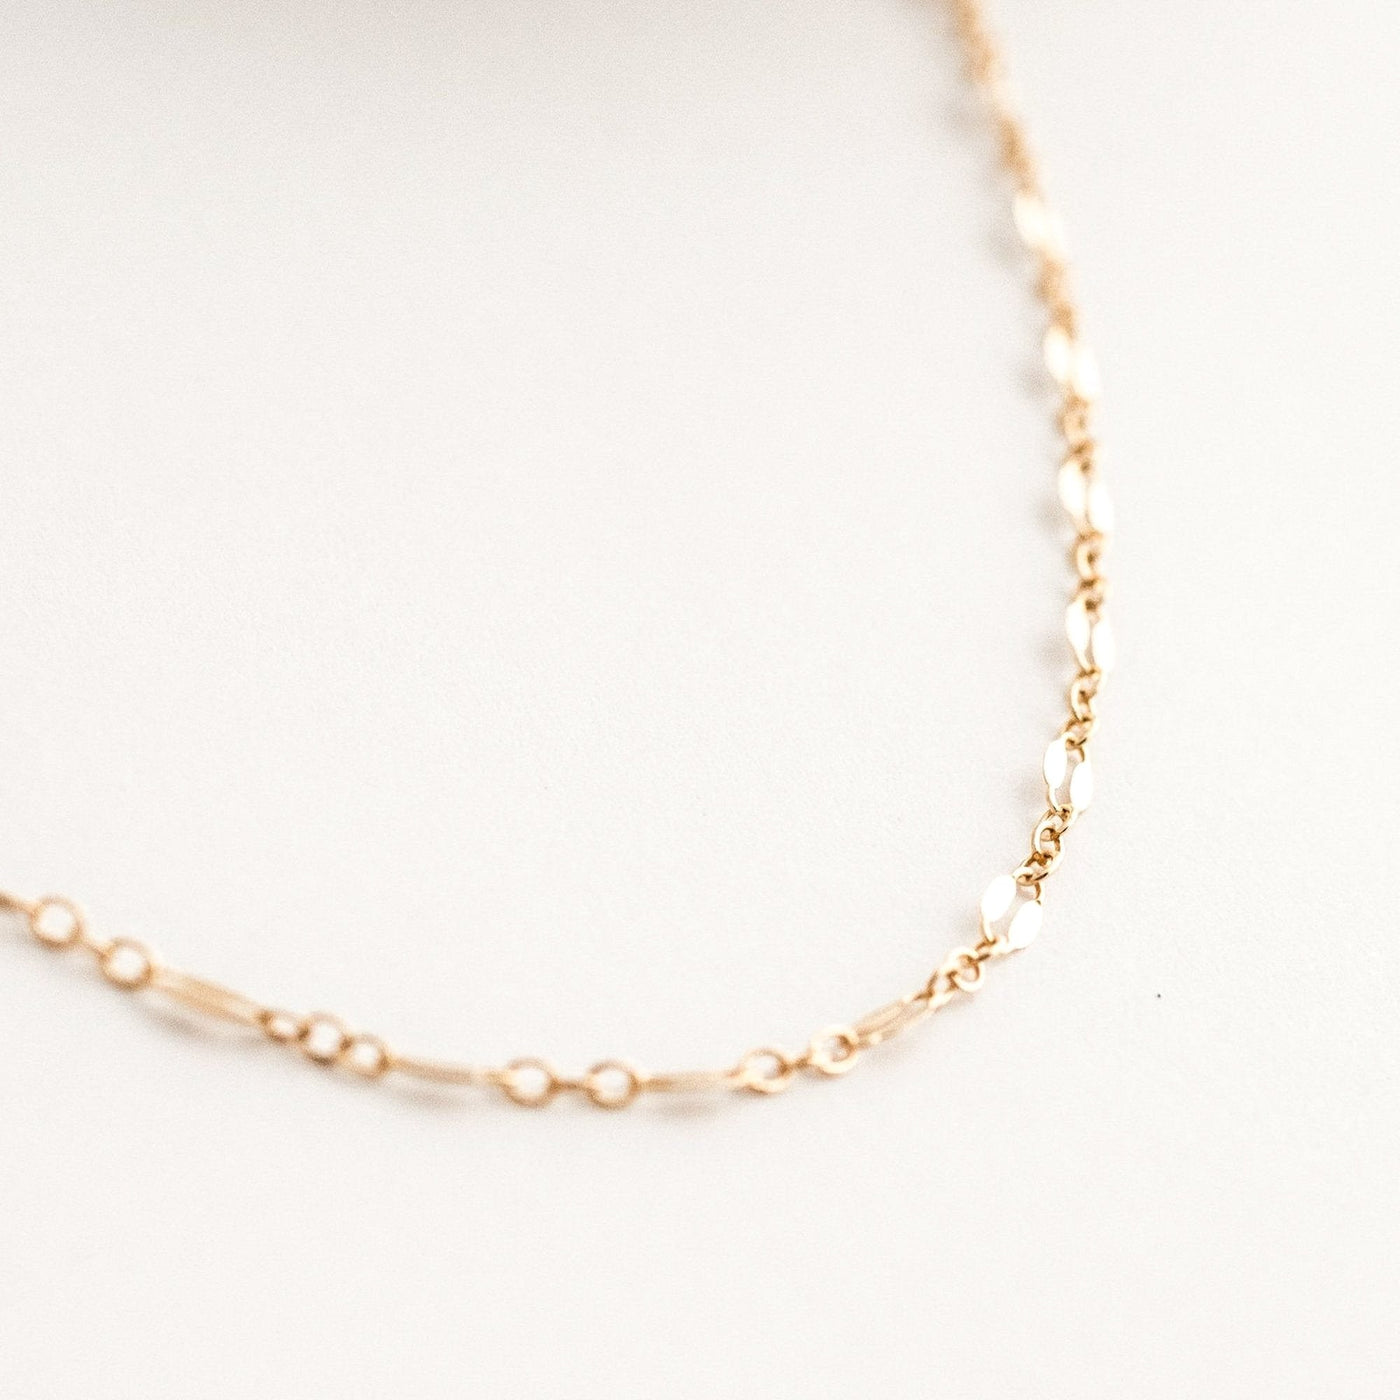 Lace Chain Necklace by Simple & Dainty Jewelry